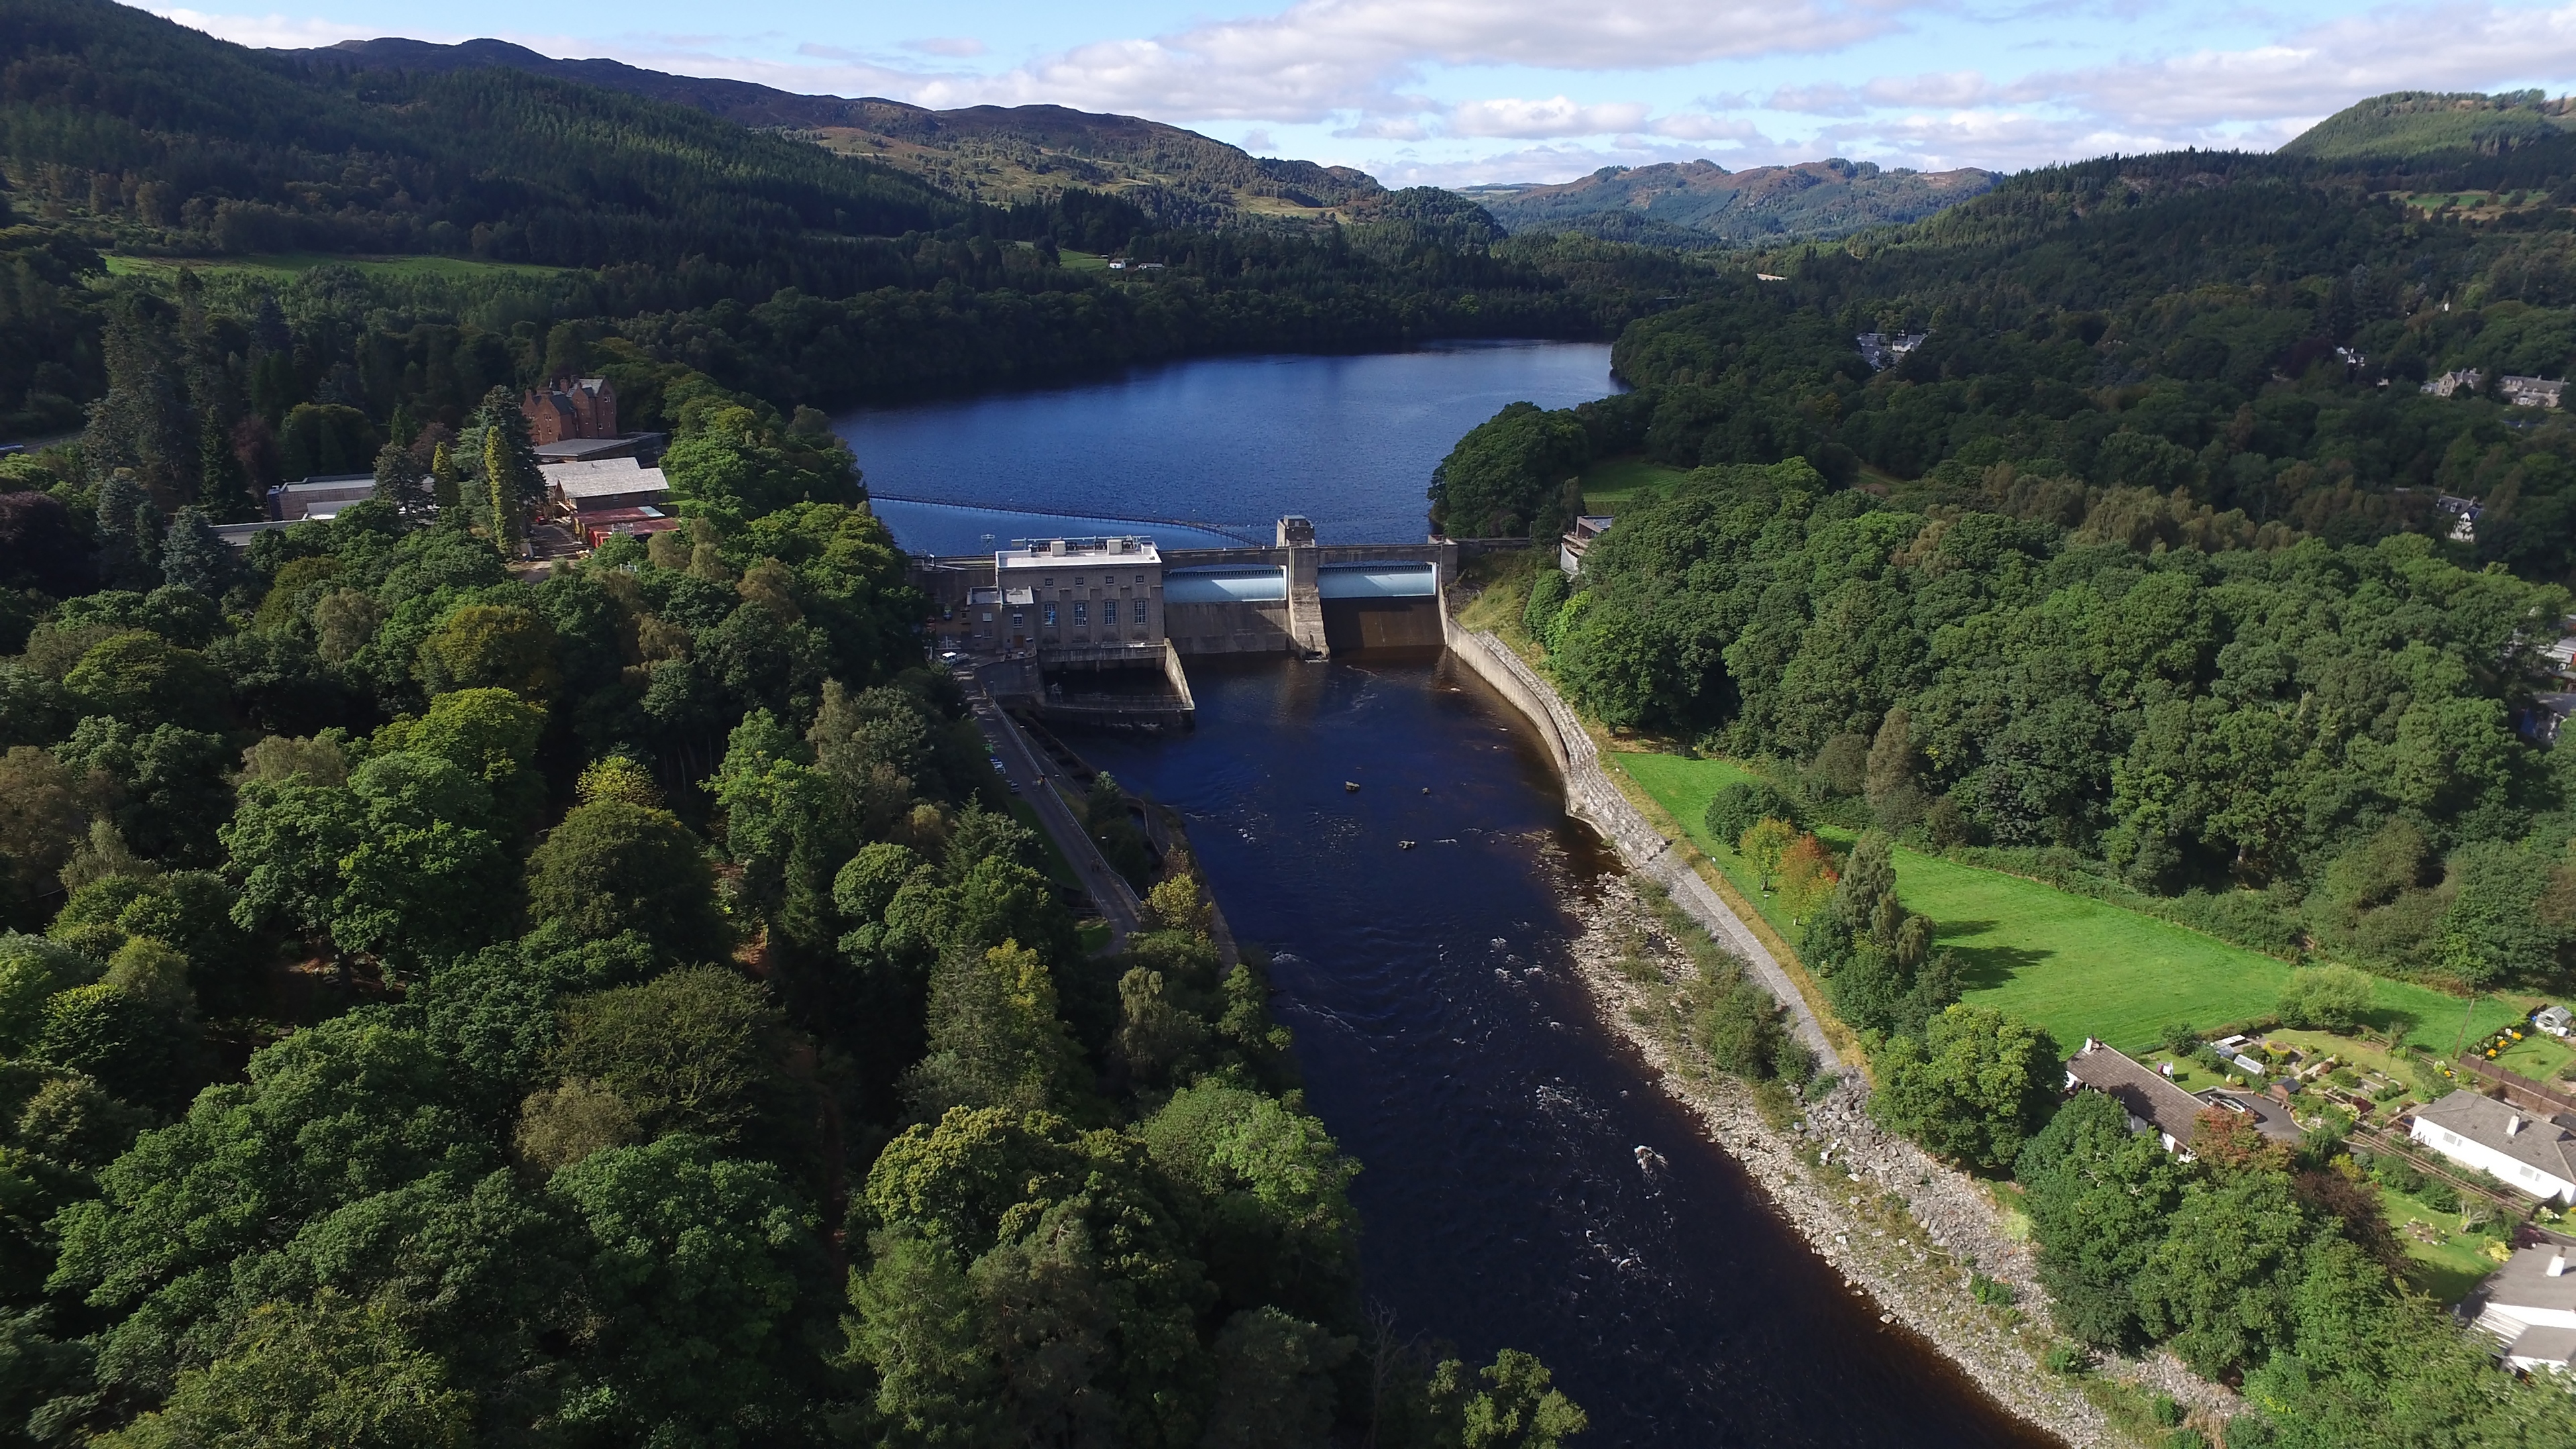 Pitlochry dam and visitor centre